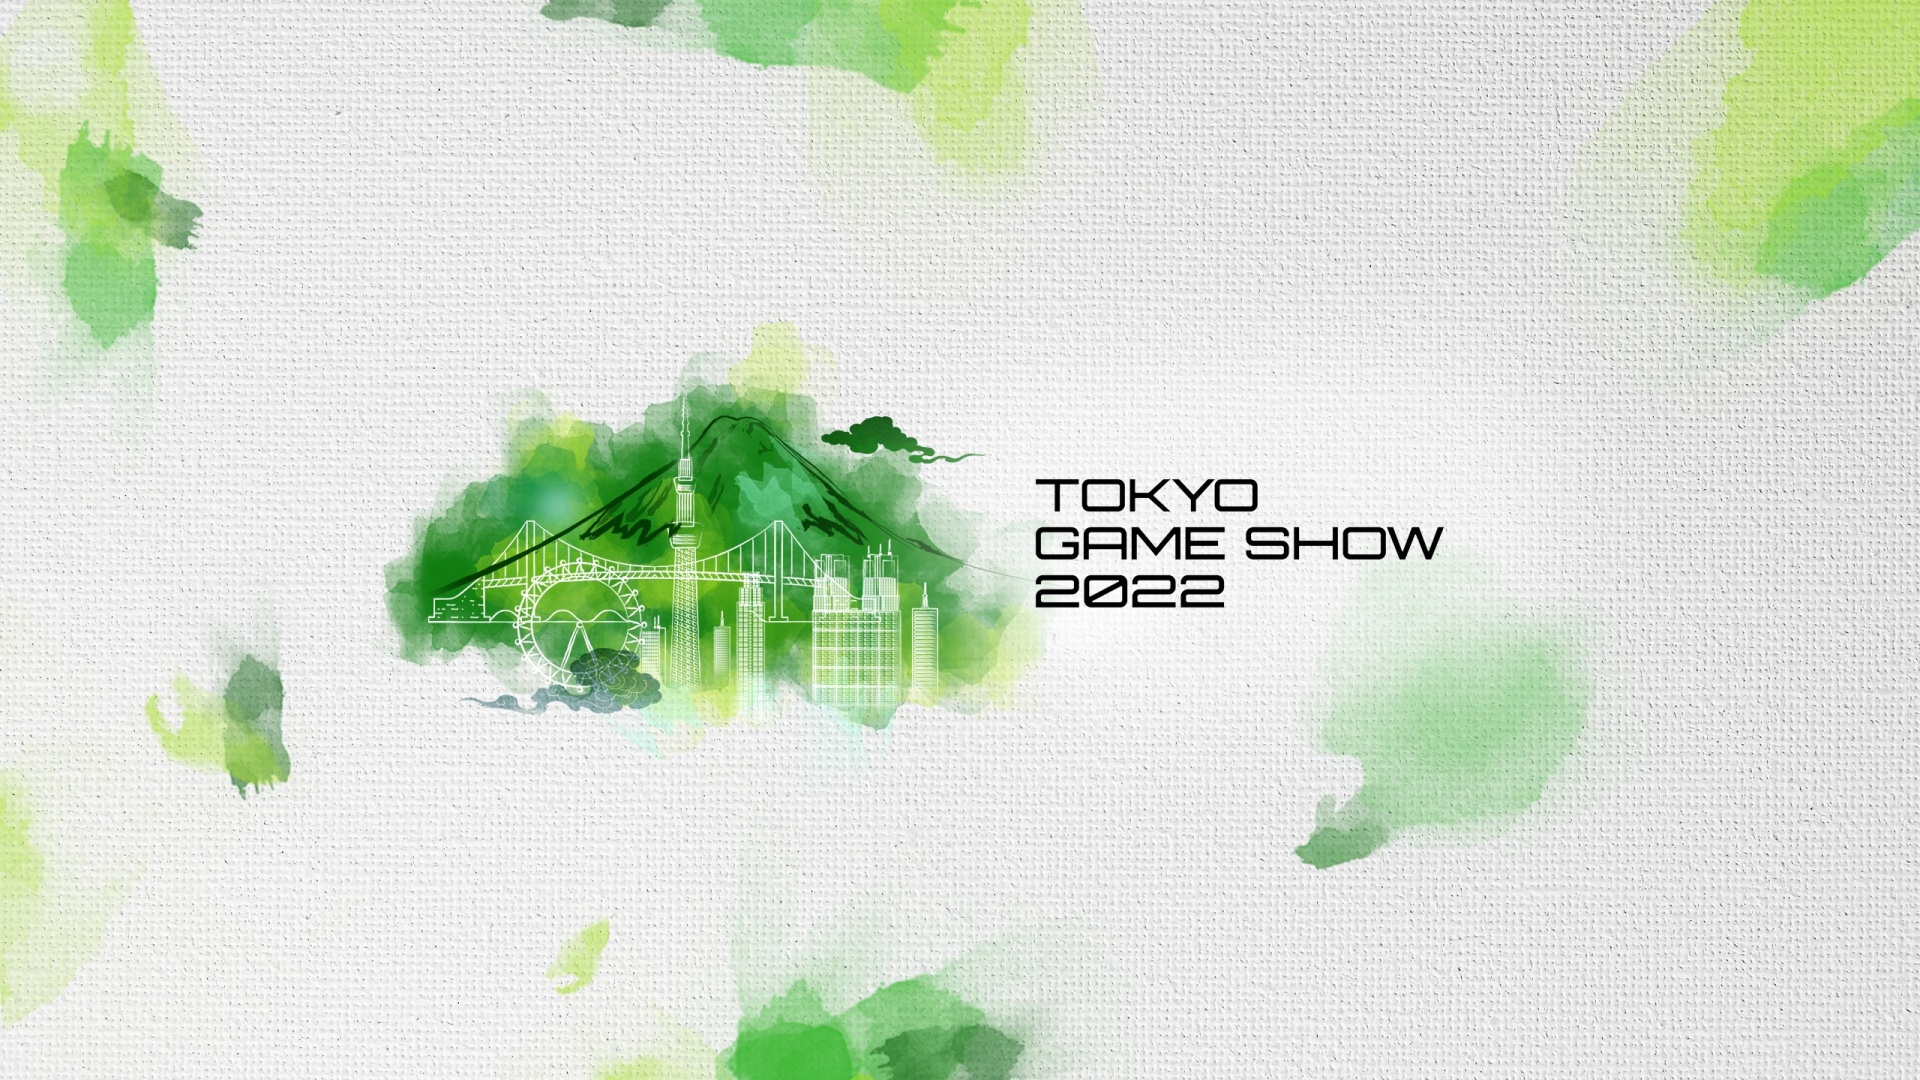 Video For Tokyo Game Show Xbox Stream 2022: News and Updates on 22 Games from majority Japanese developers, DEATHLOOP coming to Xbox Next Week, and much more!